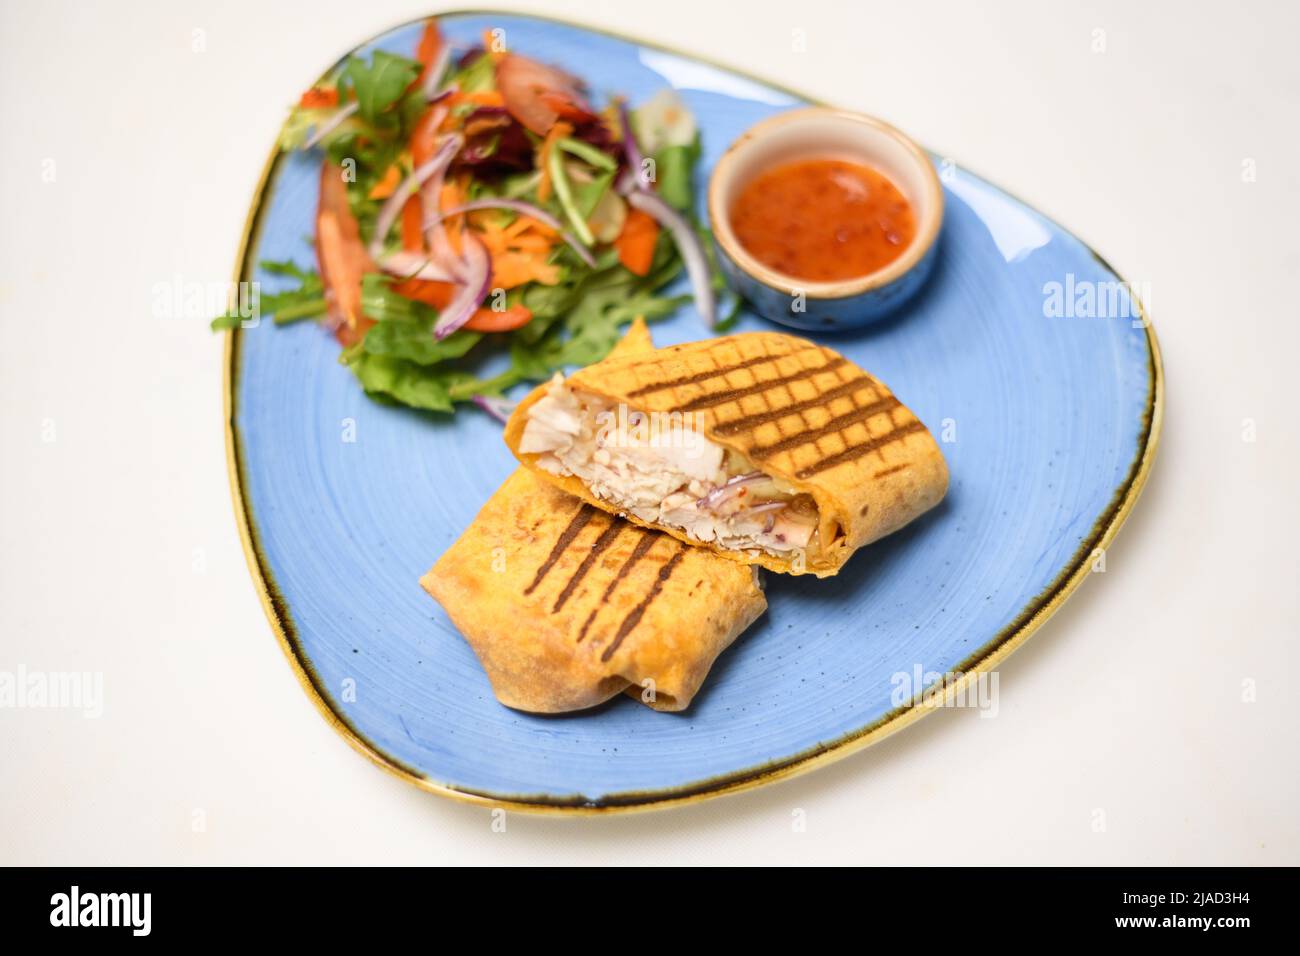 Toasted chicken, cheese and red onion tortilla wrap with salad and chili dip sauce Stock Photo